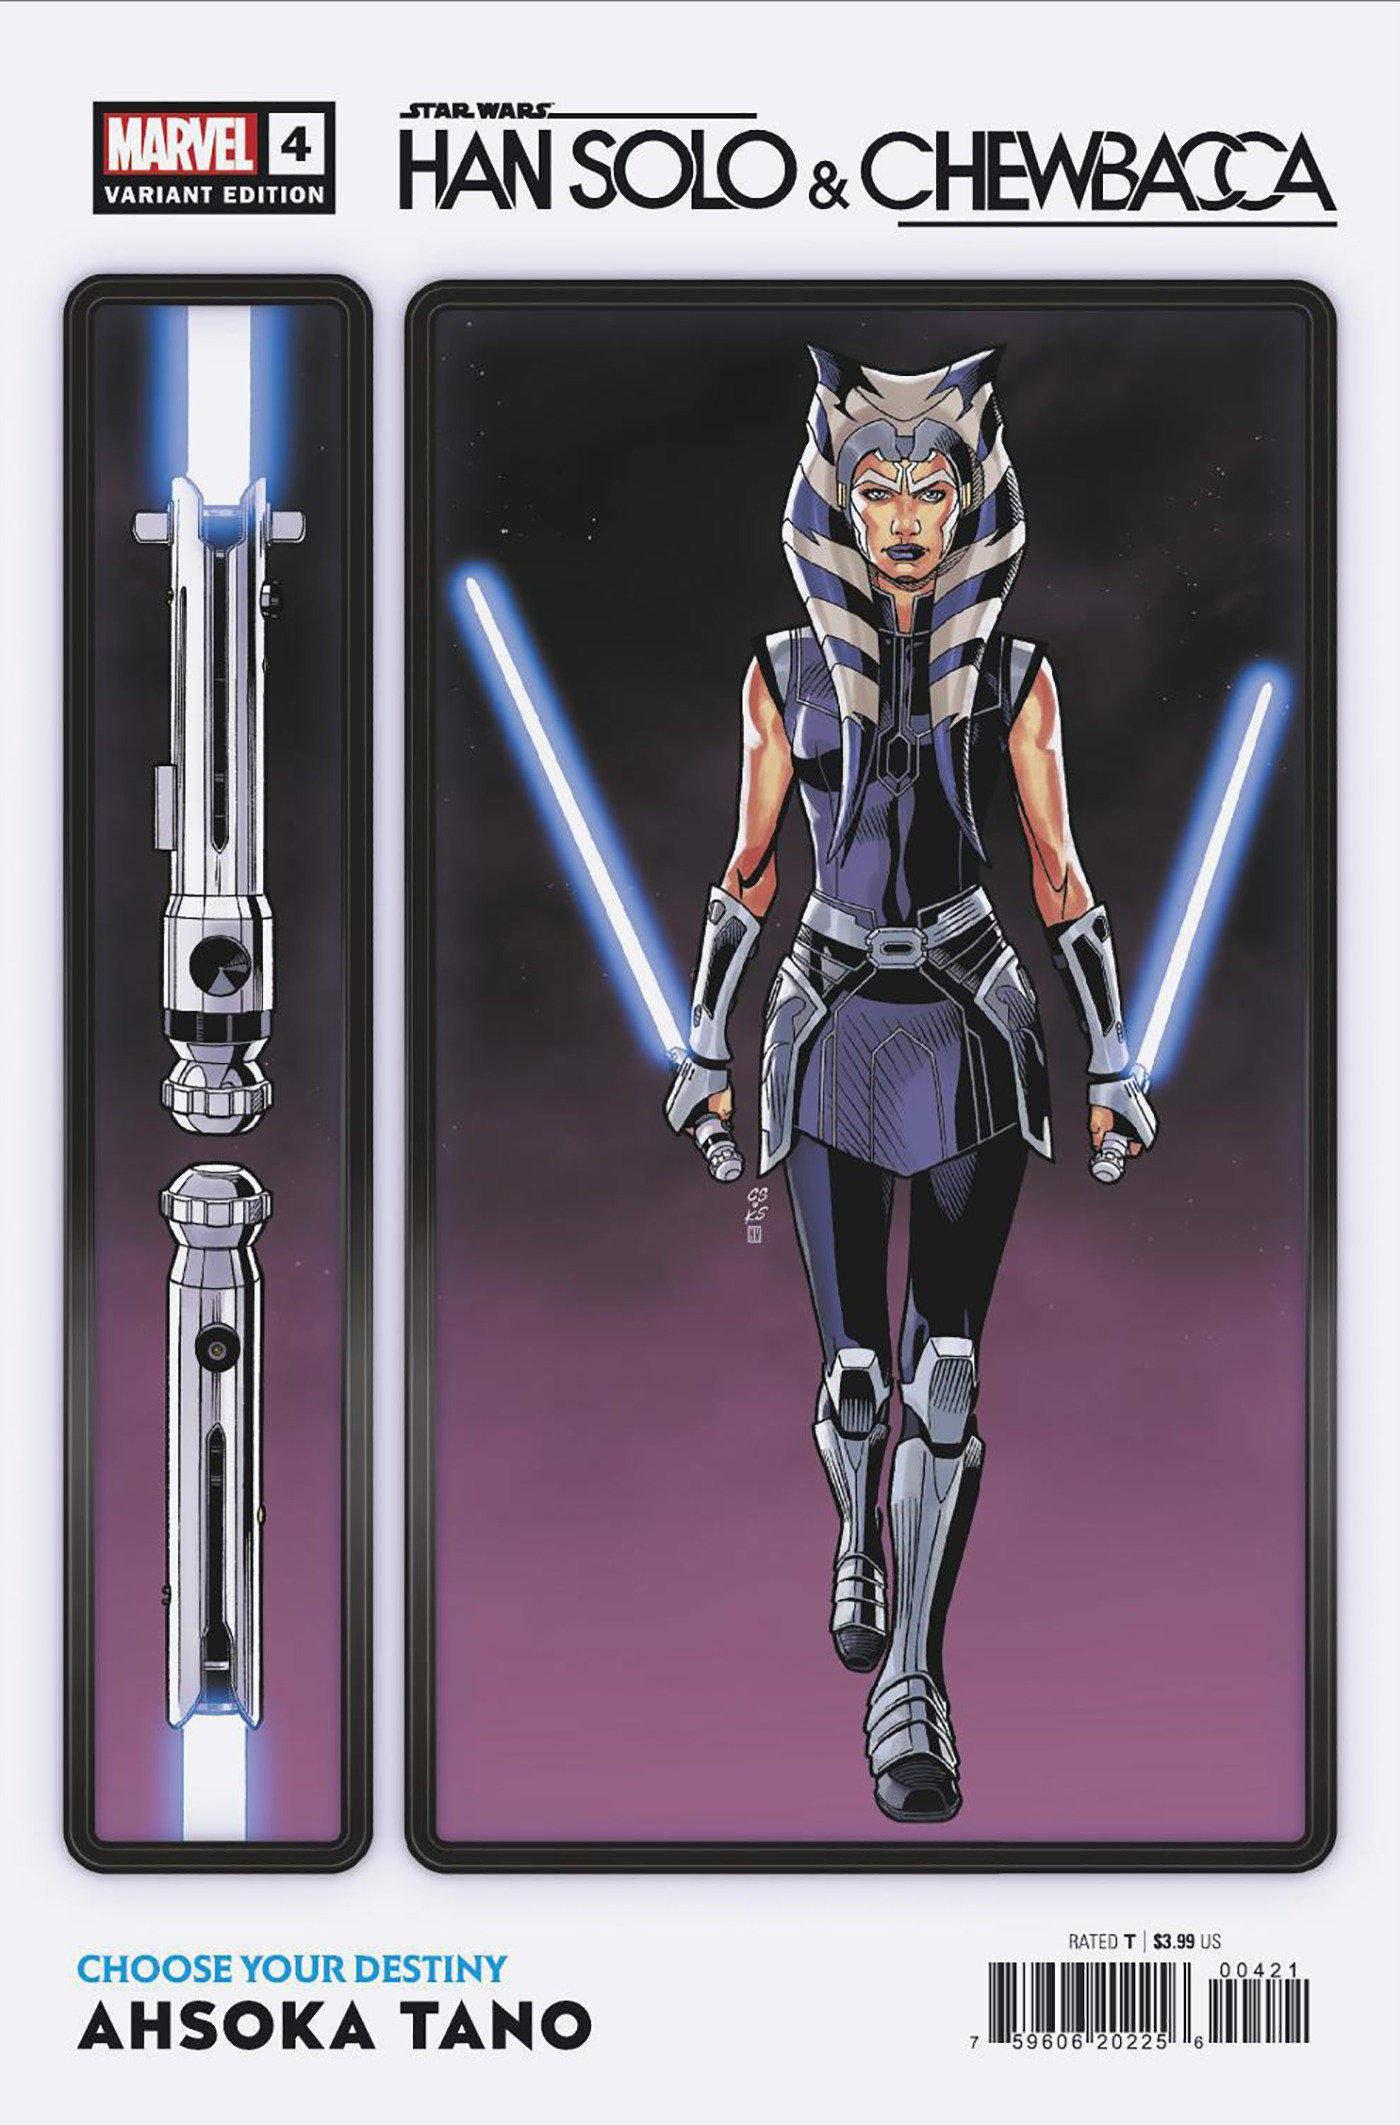 Han Solo & Chewbacca #4 (Chris Sprouse "Ahsoka Tano" Choose Your Destiny Variant Cover) (20.07.2022)